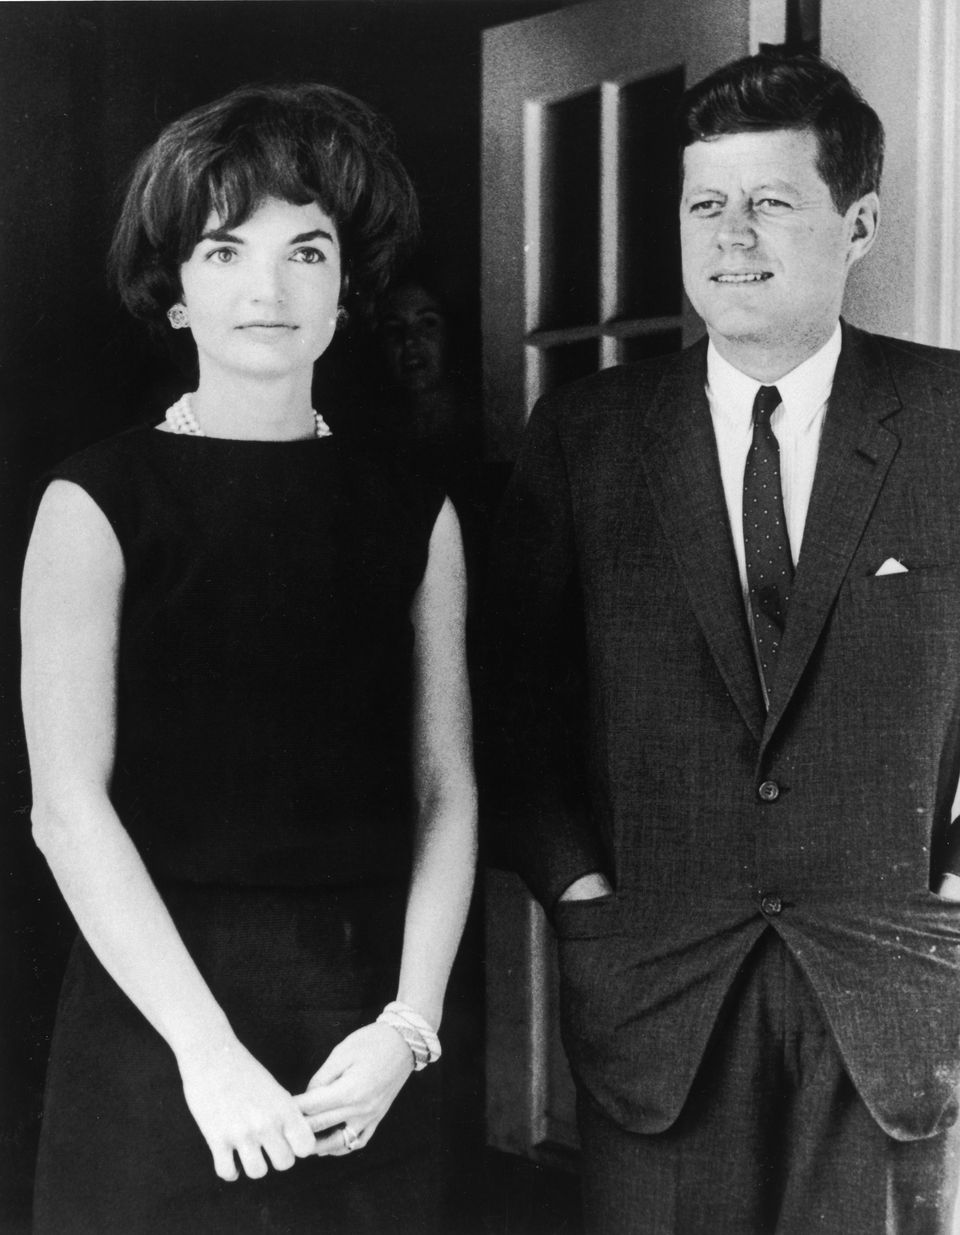 Jacqueline "Jackie" Kennedy with John F. Kennedy at the White House in 1961 in Washington, D.C. | Photo: Getty Images